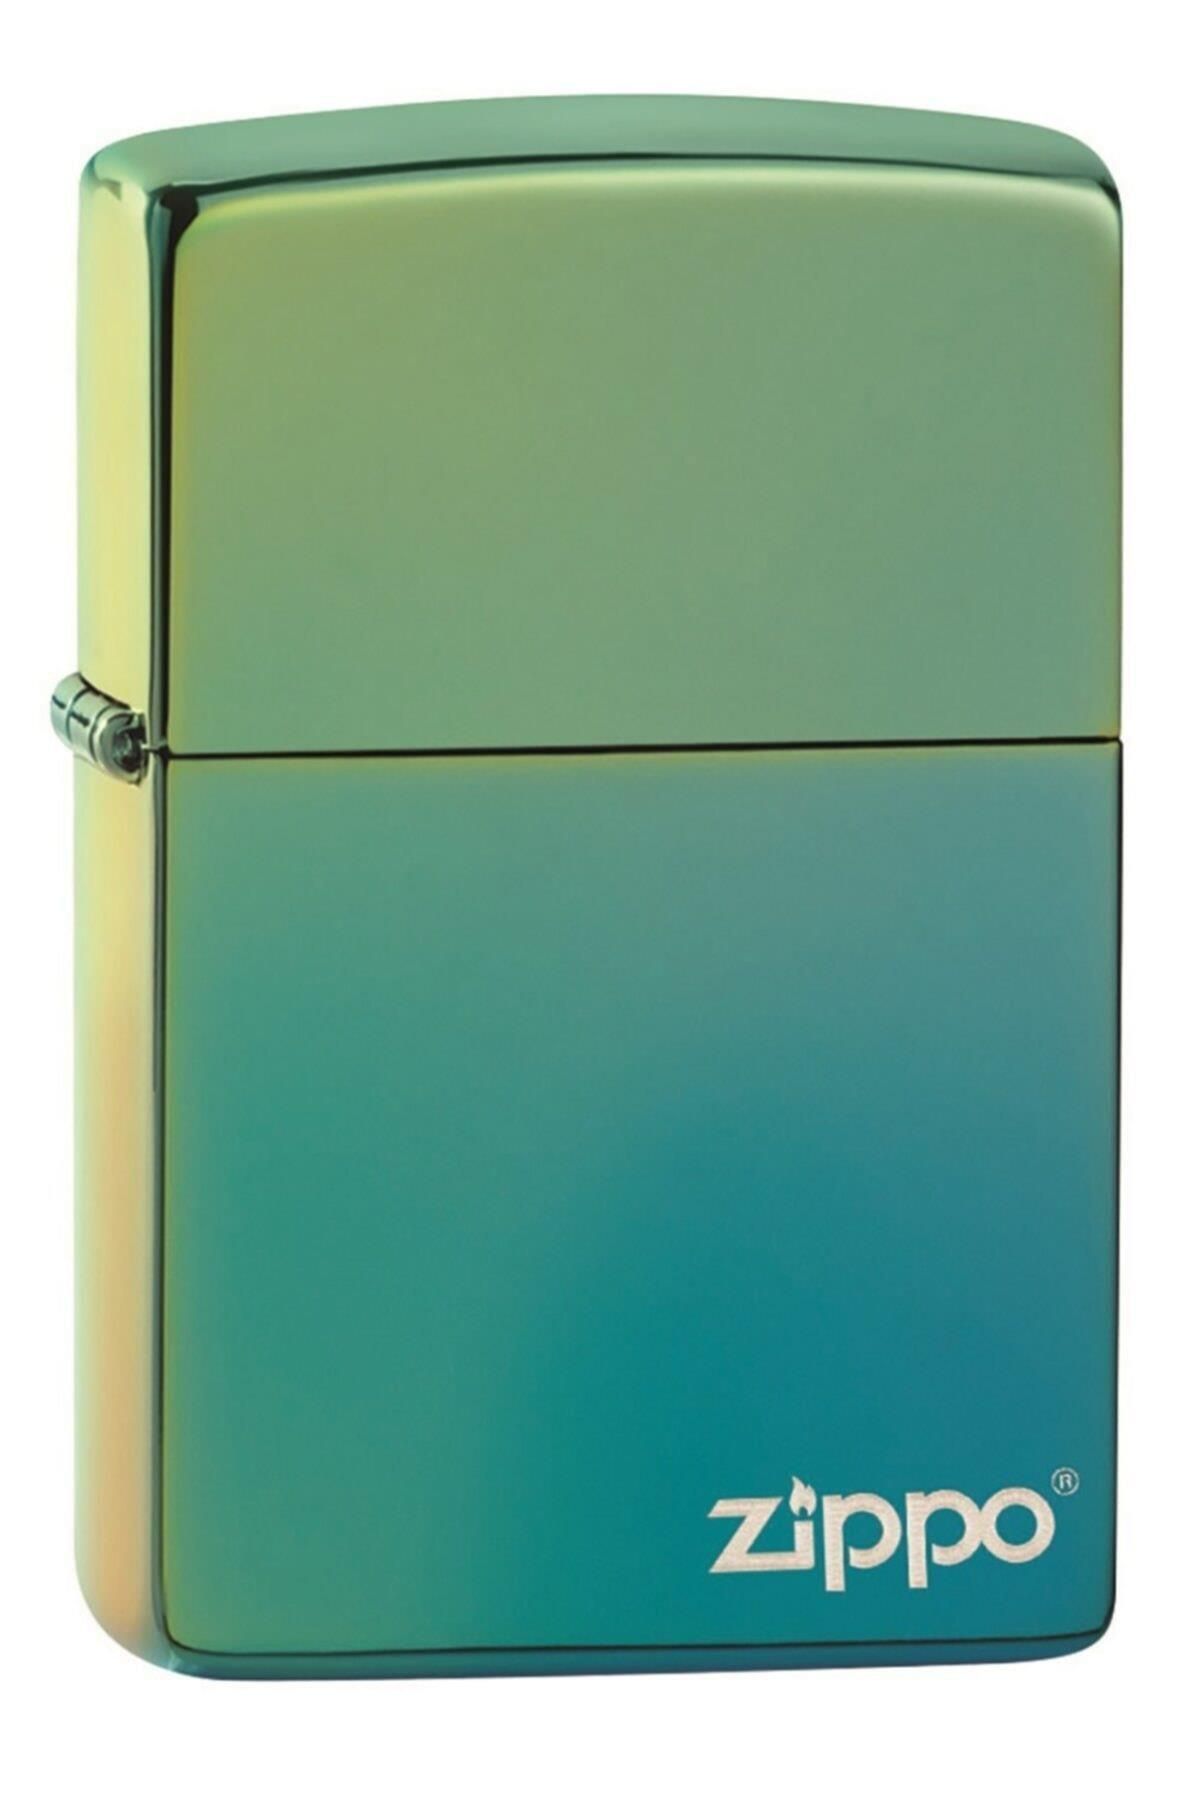 Zippo Hp Teal Lasered 5.1 Grup 49191zl